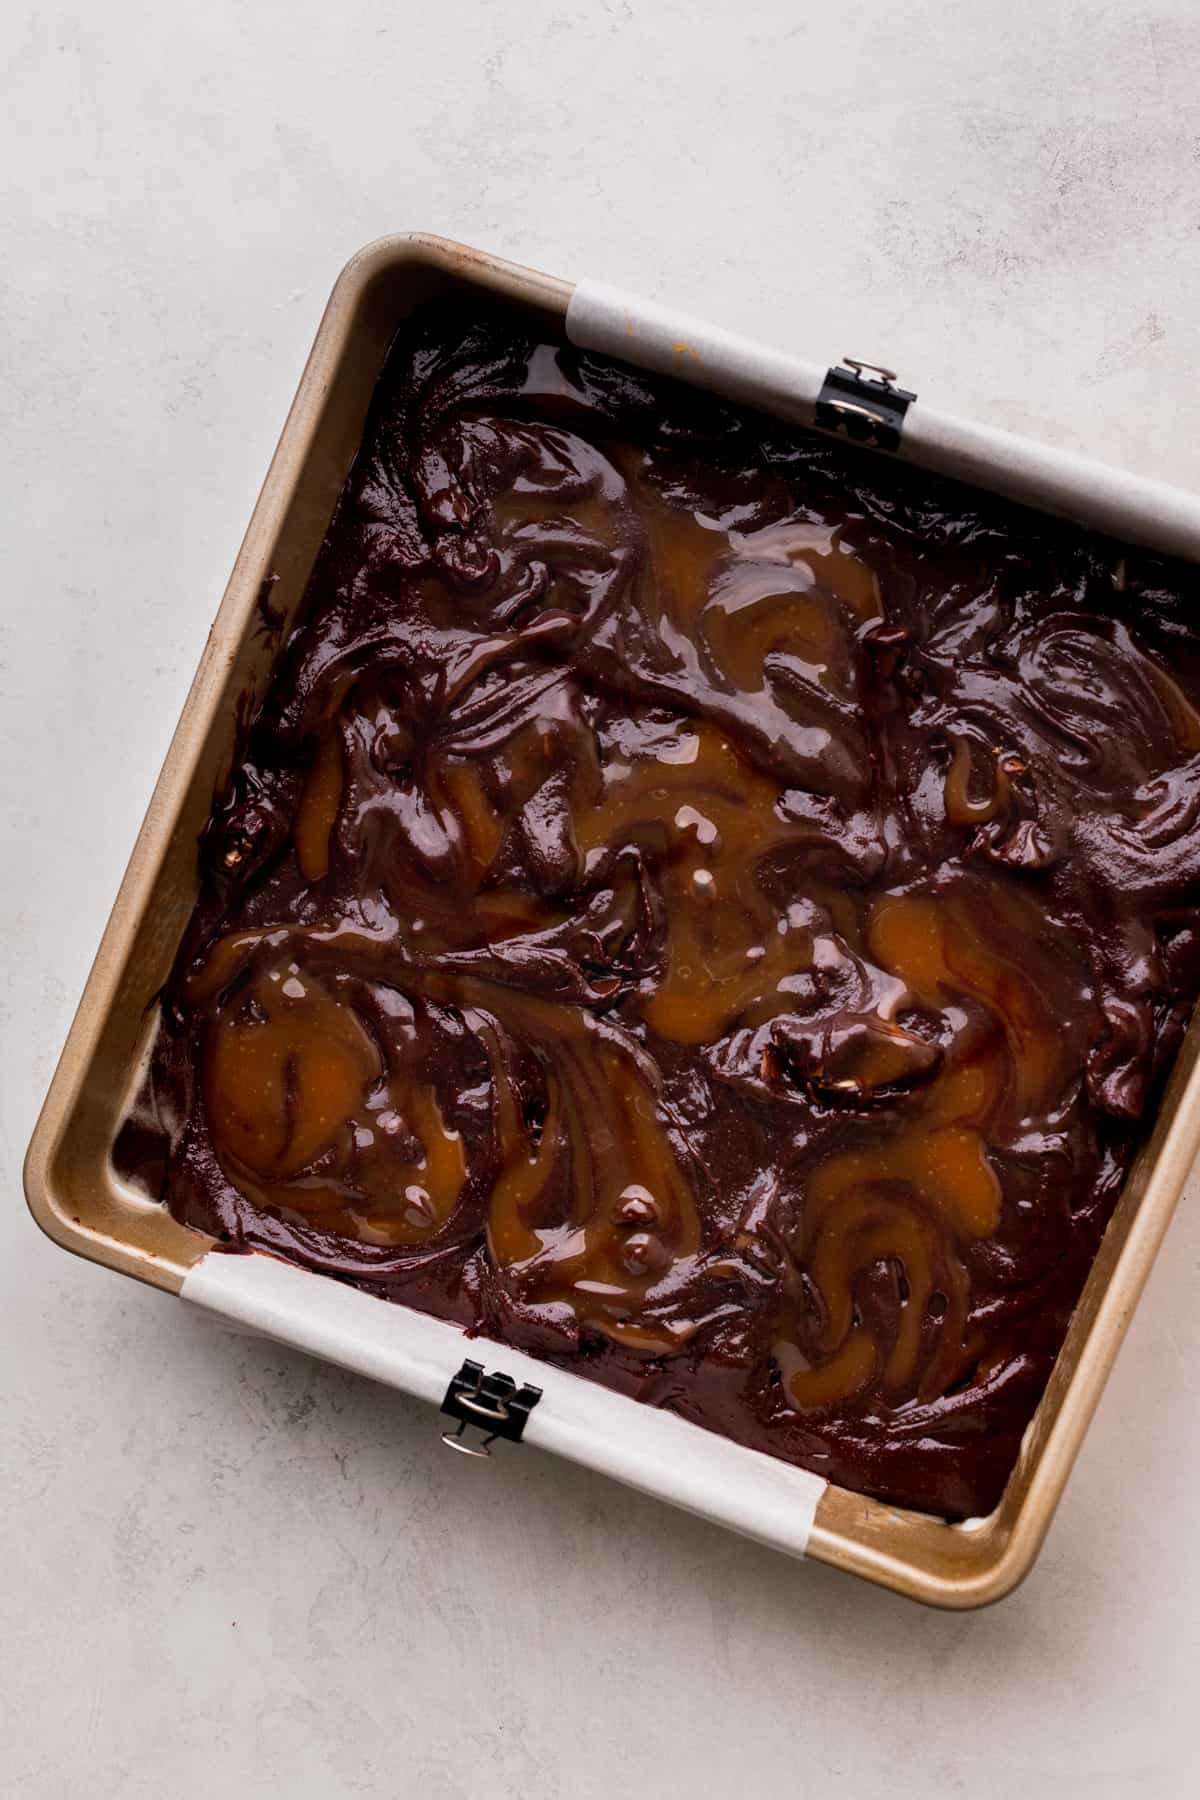 Caramel on top of brownie batter in a pan.